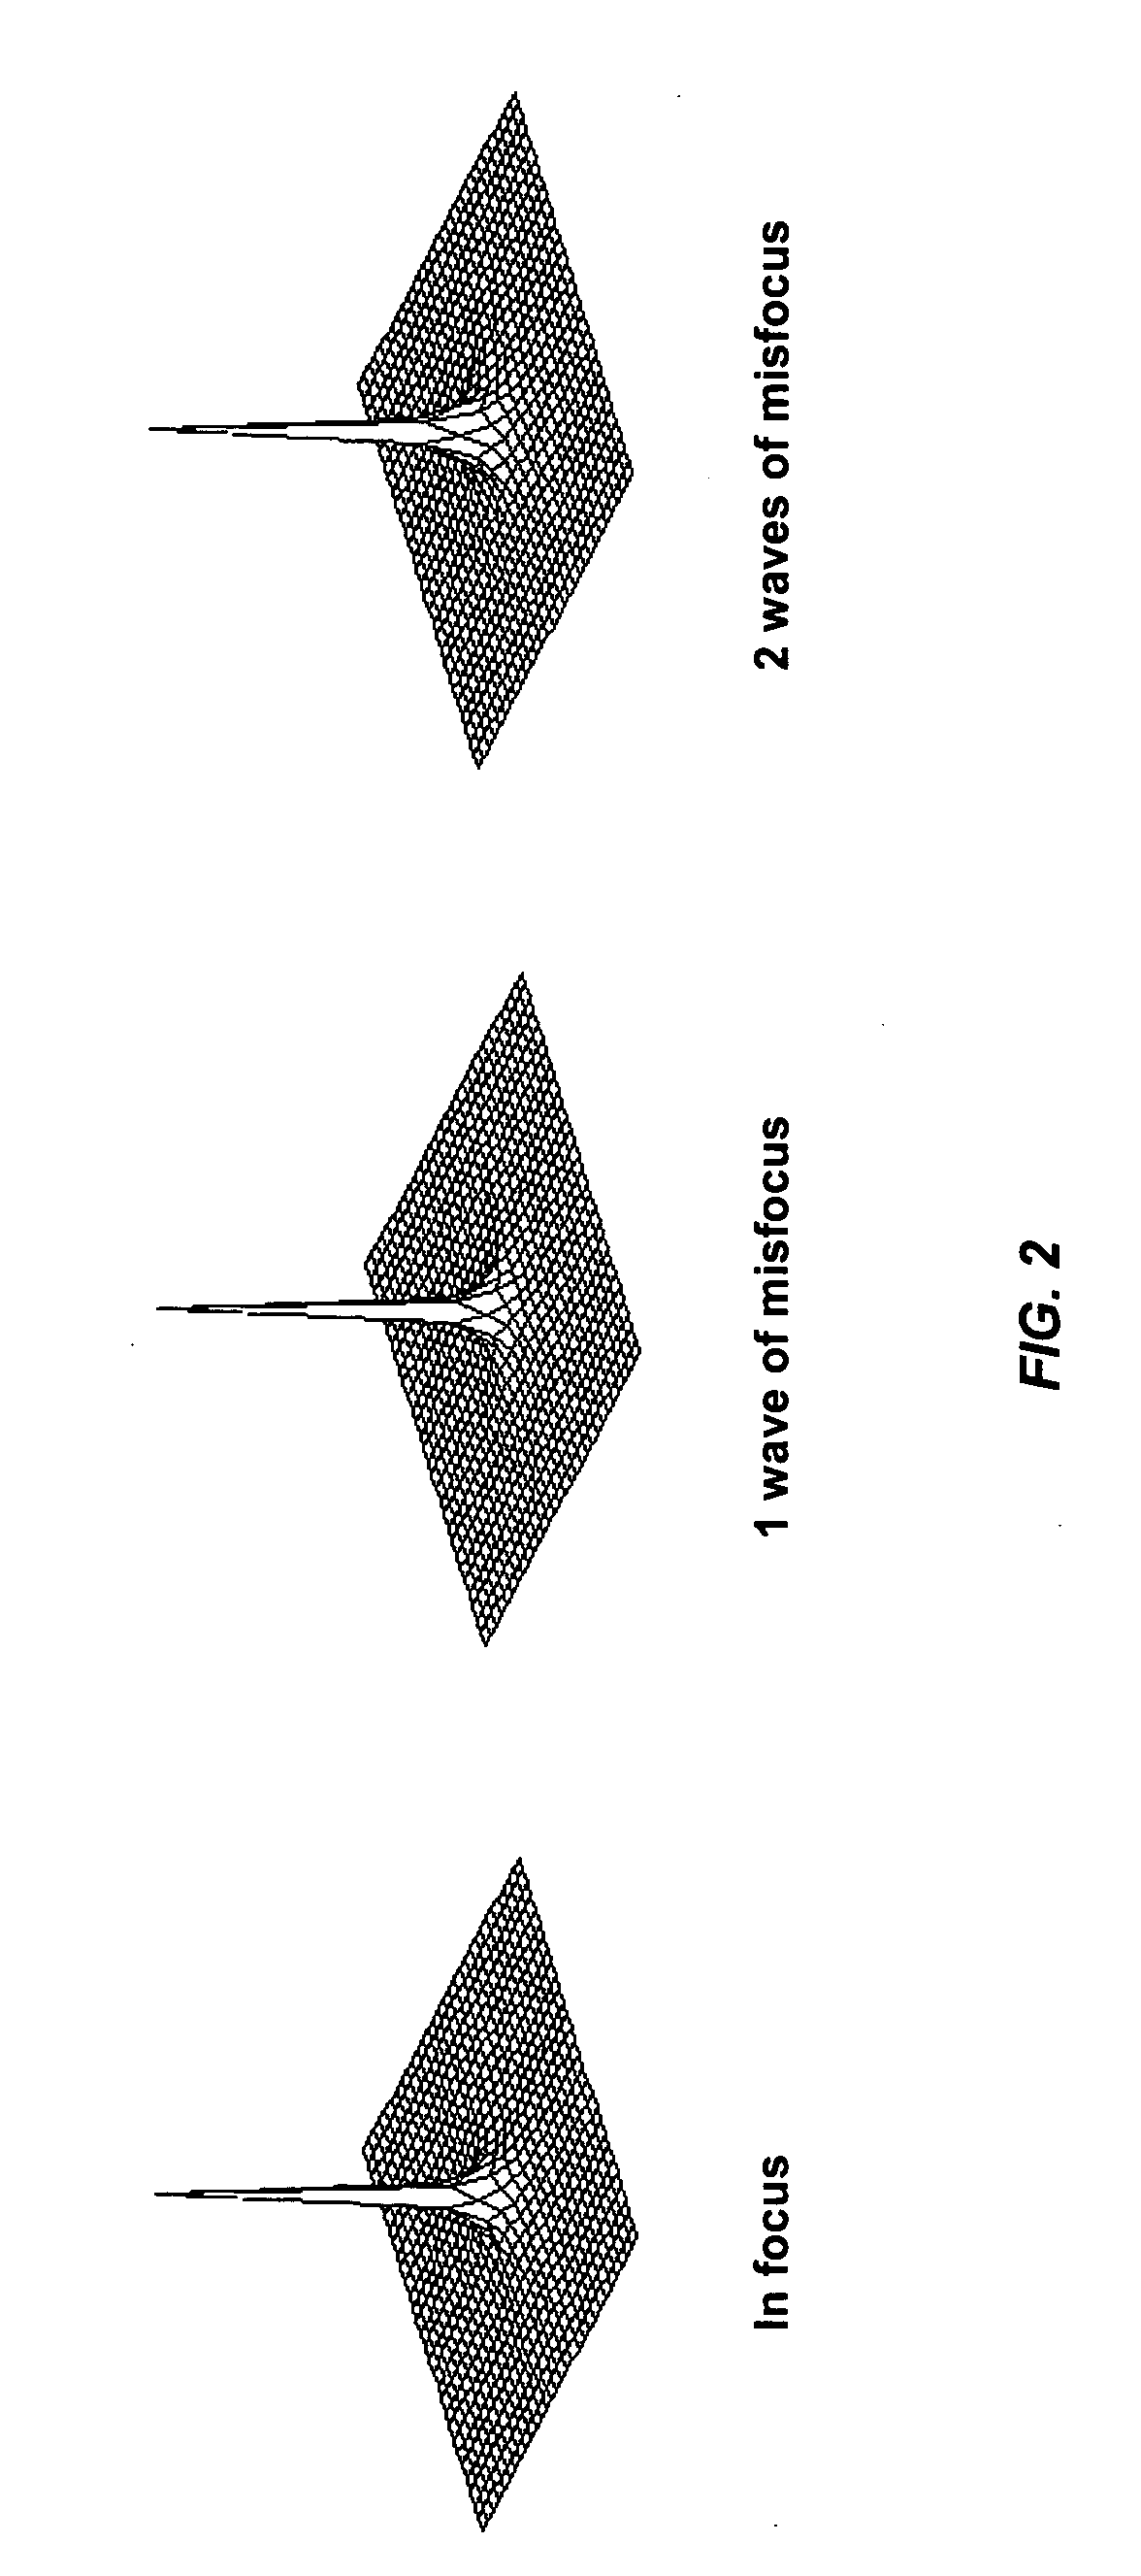 Lithographic systems and methods with extended depth of focus